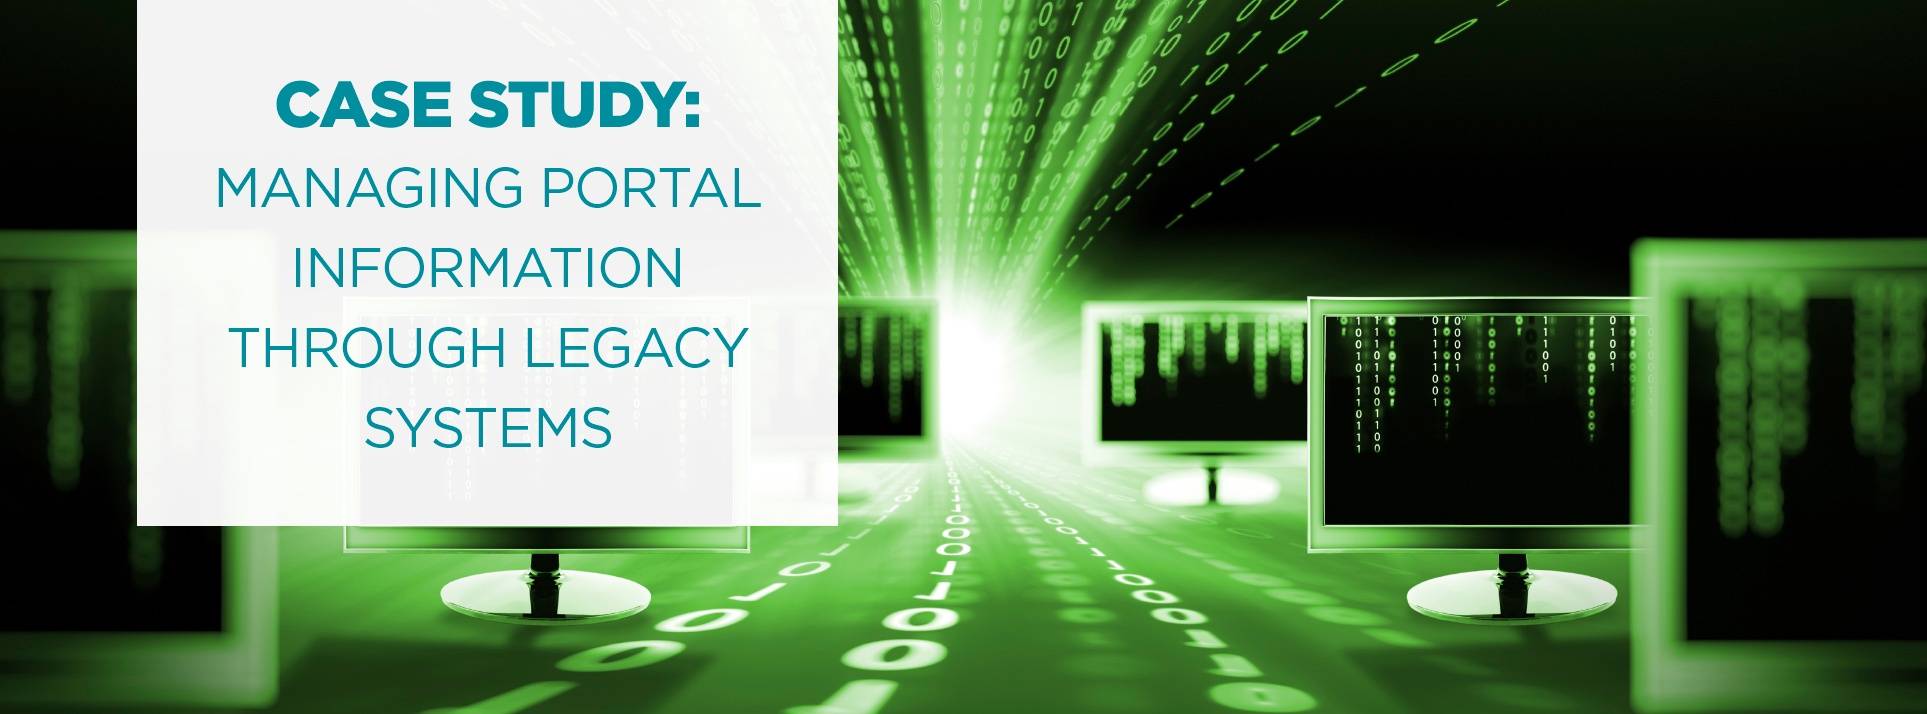 Managing Portal Information Through Legacy Systems Case Study